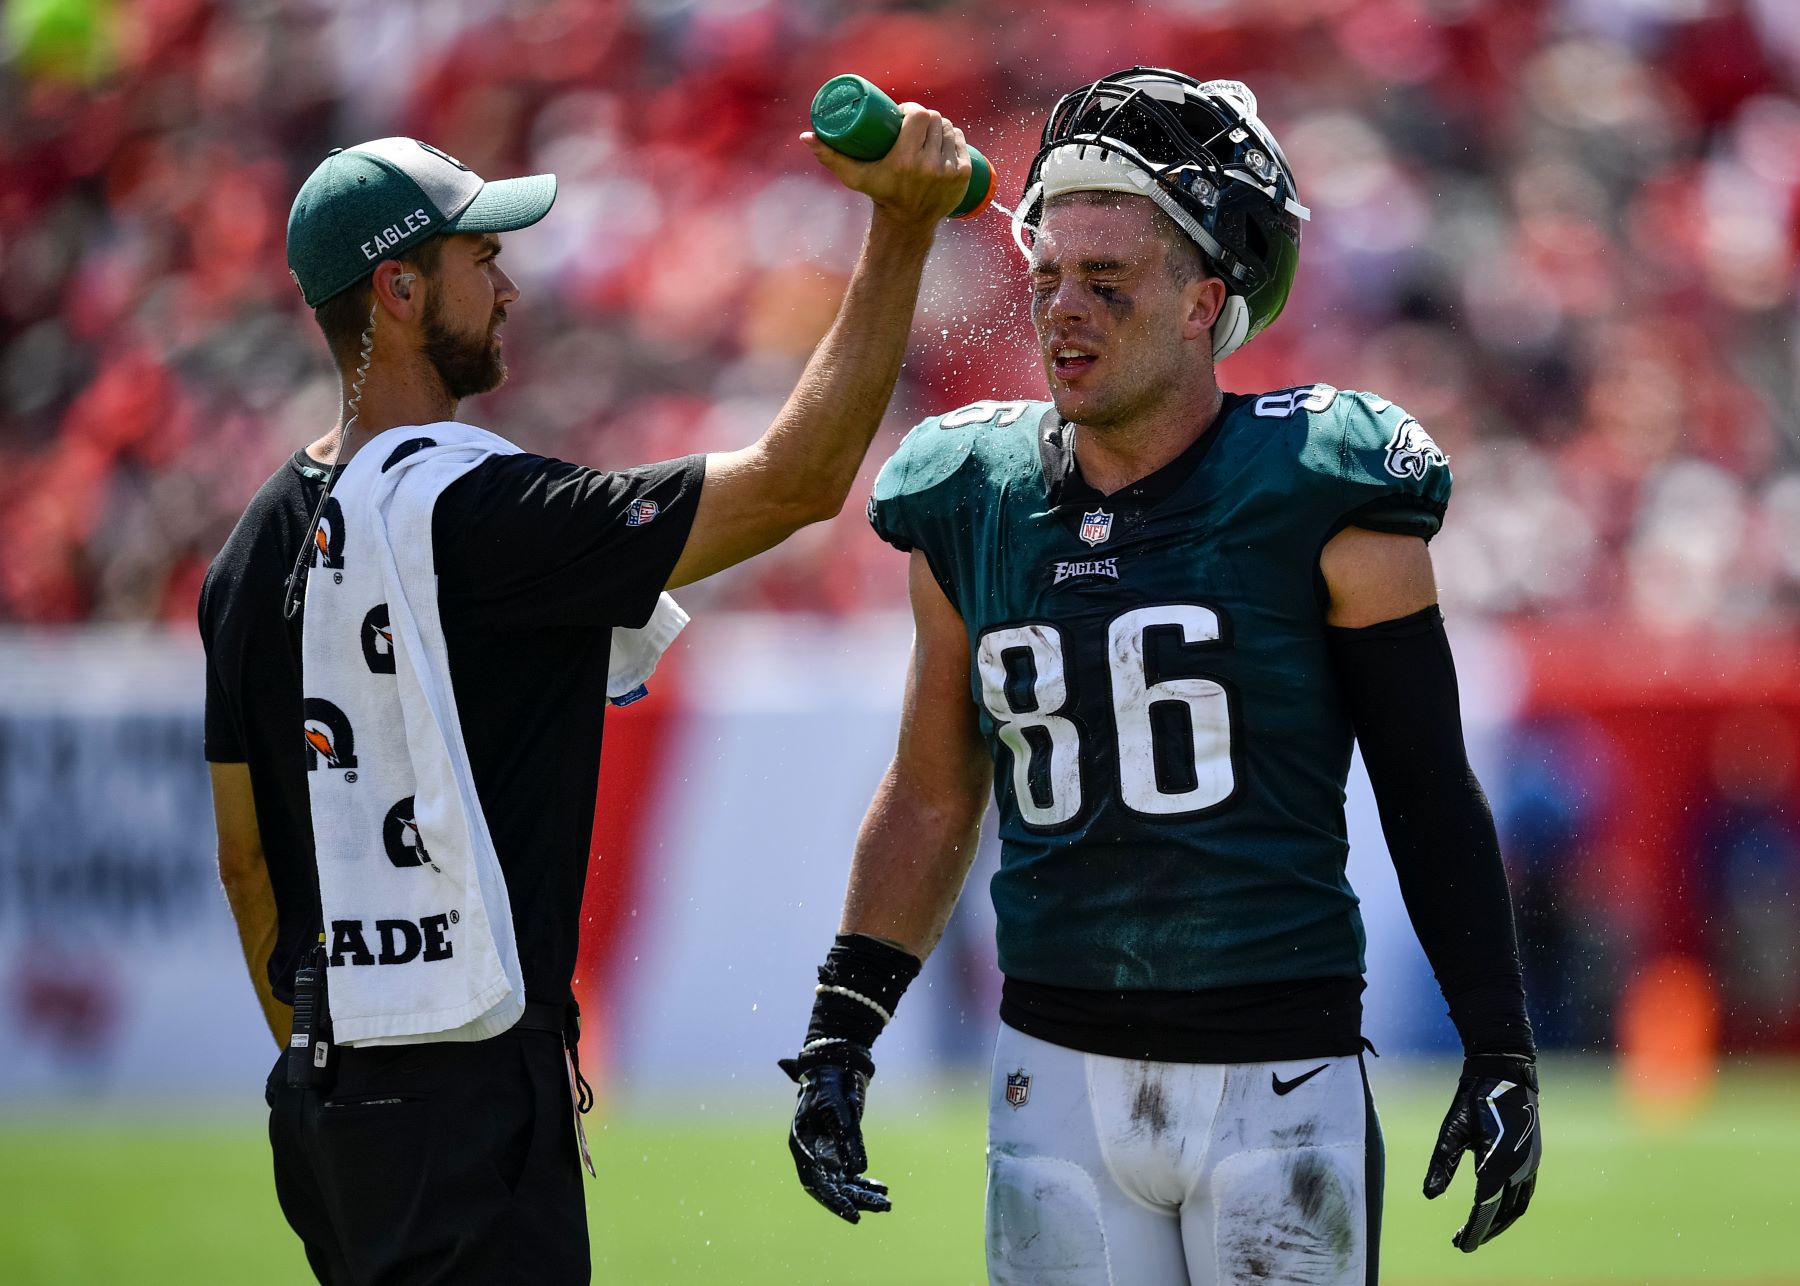 Philadelphia Eagles tight end Zach Ertz hosed down by water boy during an NFL game against the Tampy Bay Buccaneers at Raymond James Stadium in Tampa, Florida